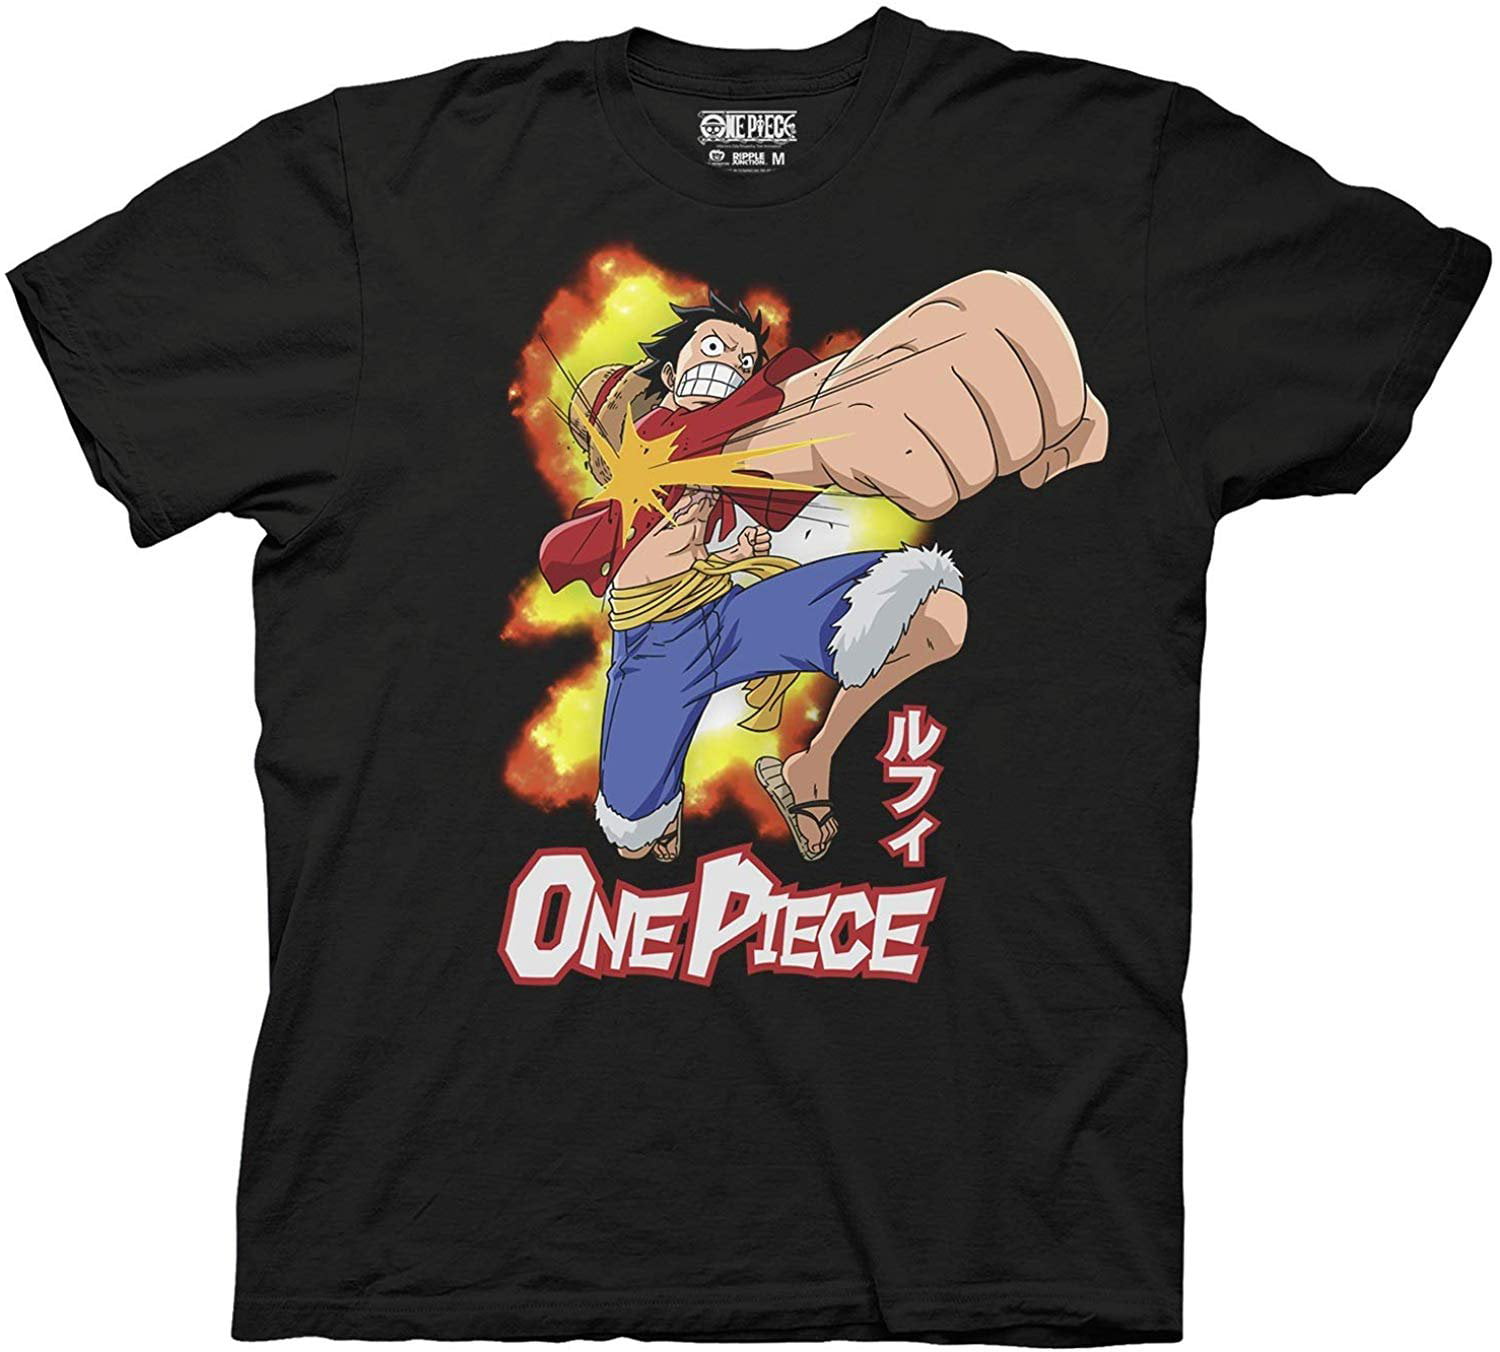 Ripple Junction Ripple Junction Mens One Piece Anime T Shirt One